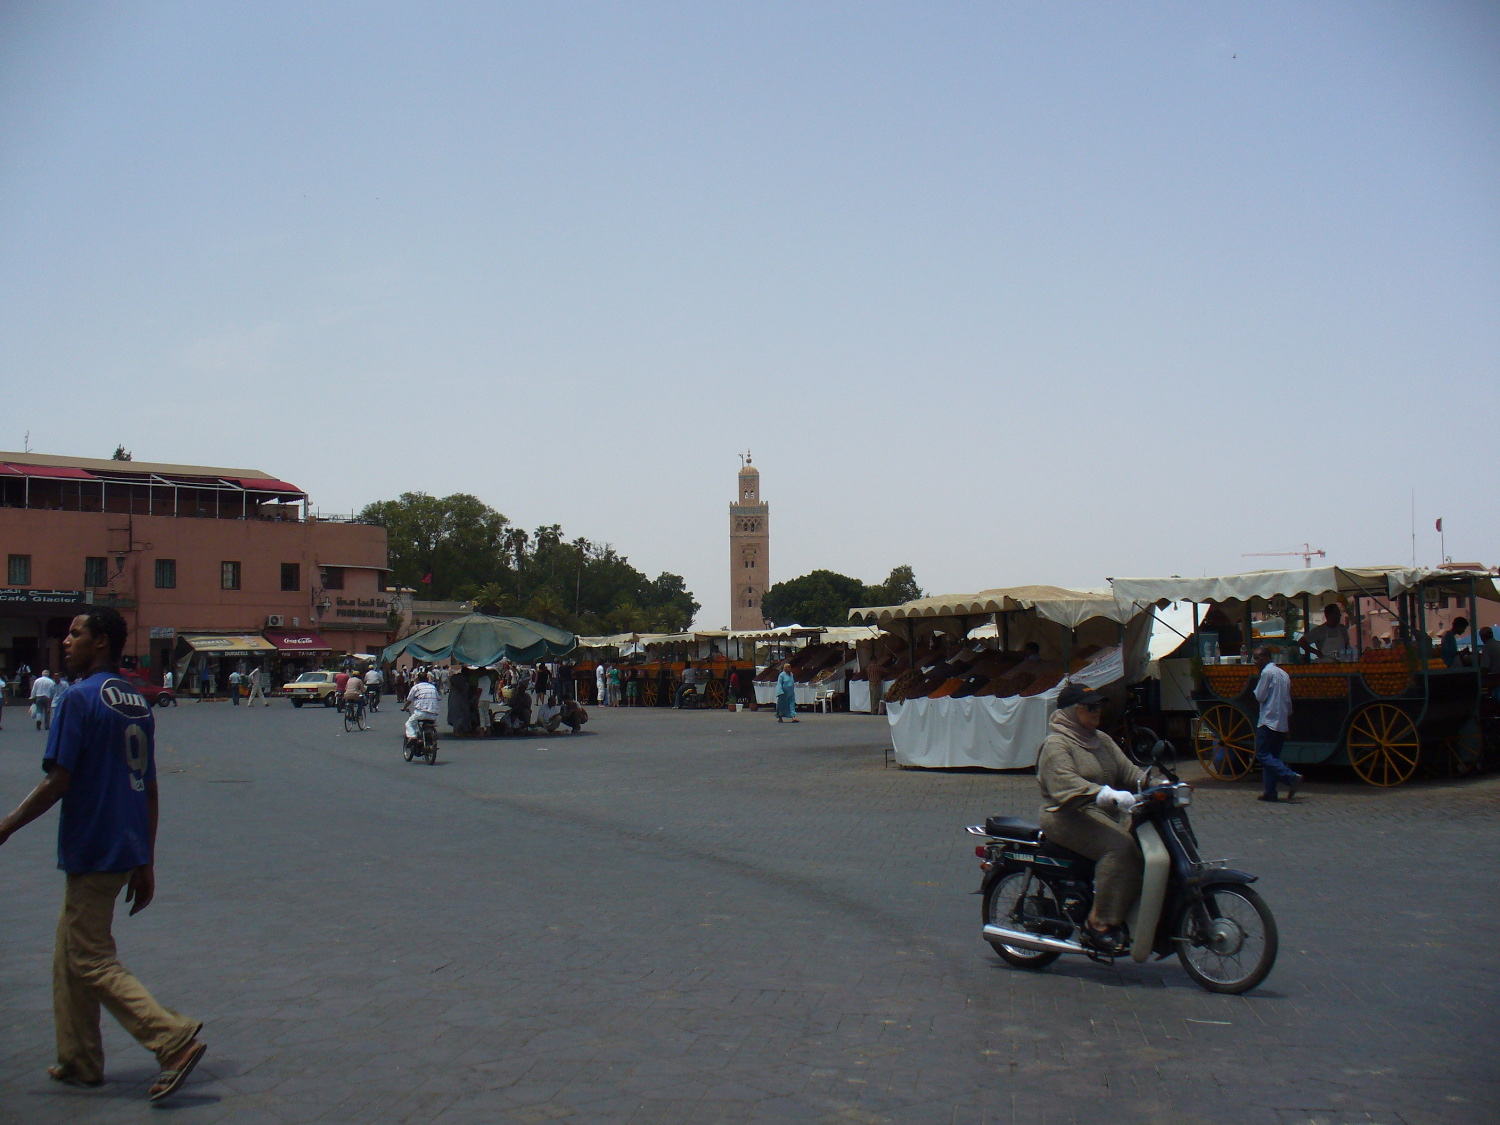 View of the square, with Kutubiyya Mosque minaret in background